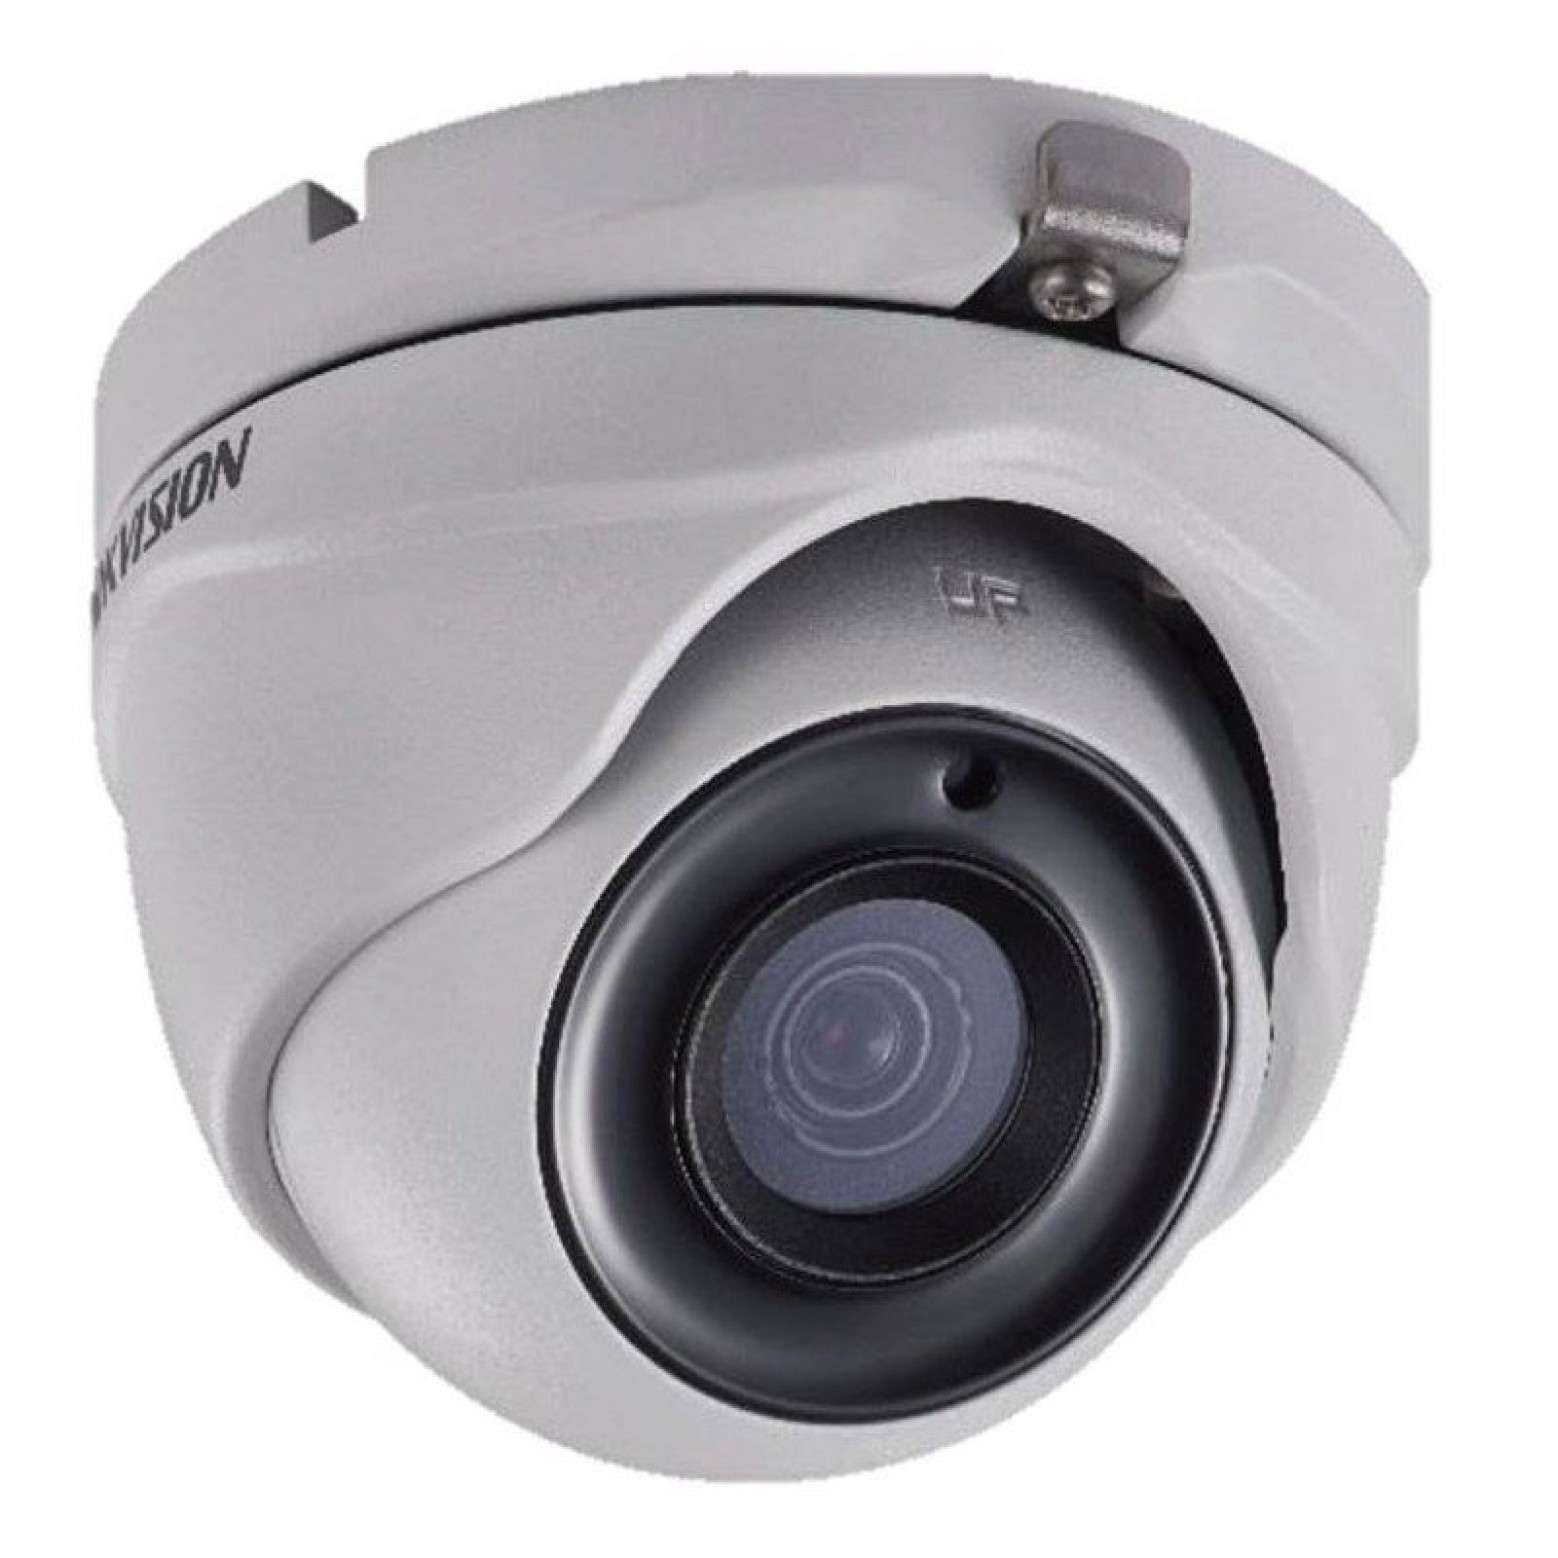 Hikvision DS-2CE56H0T-ITMF 5MP Dome camera 2.8mm, 20m Exir